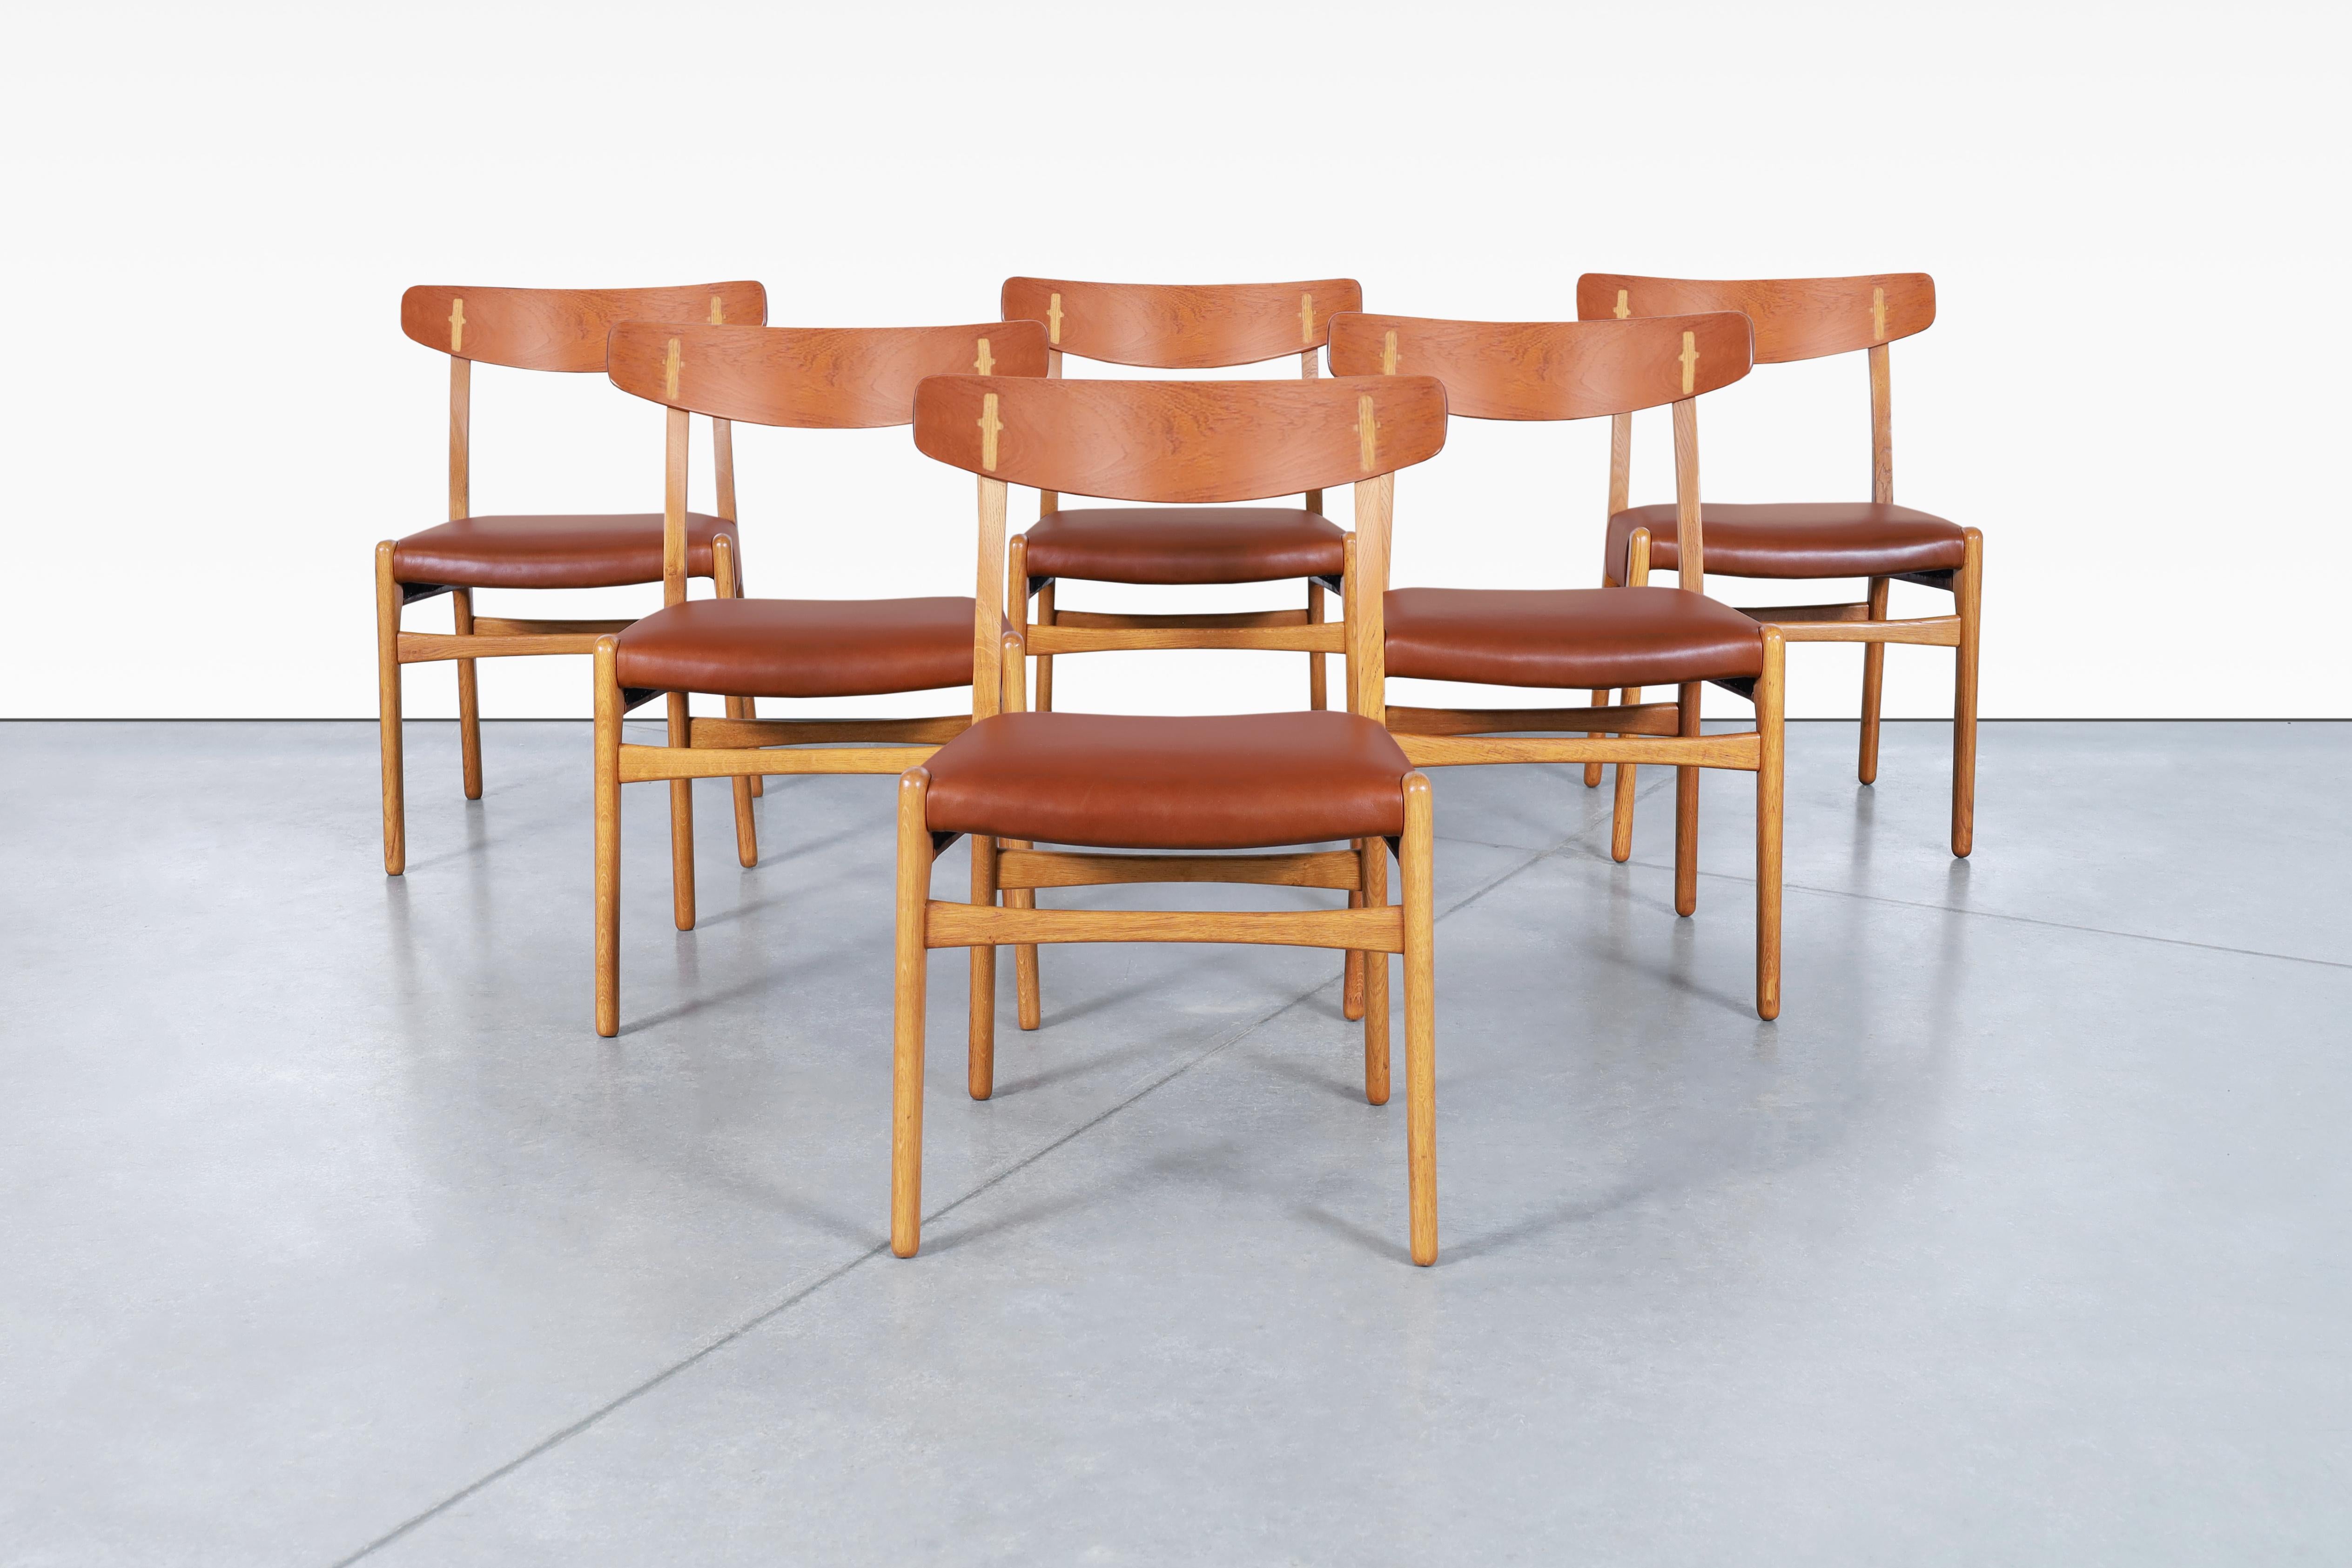 Beautiful Danish modern leather dining chairs designed by the iconic designer Hans J. Wegner for Carl Hansen & Søn in Denmark, circa 1950’s. These famous chairs, also known as CH-23, have been professionally refinished and reupholstered in high